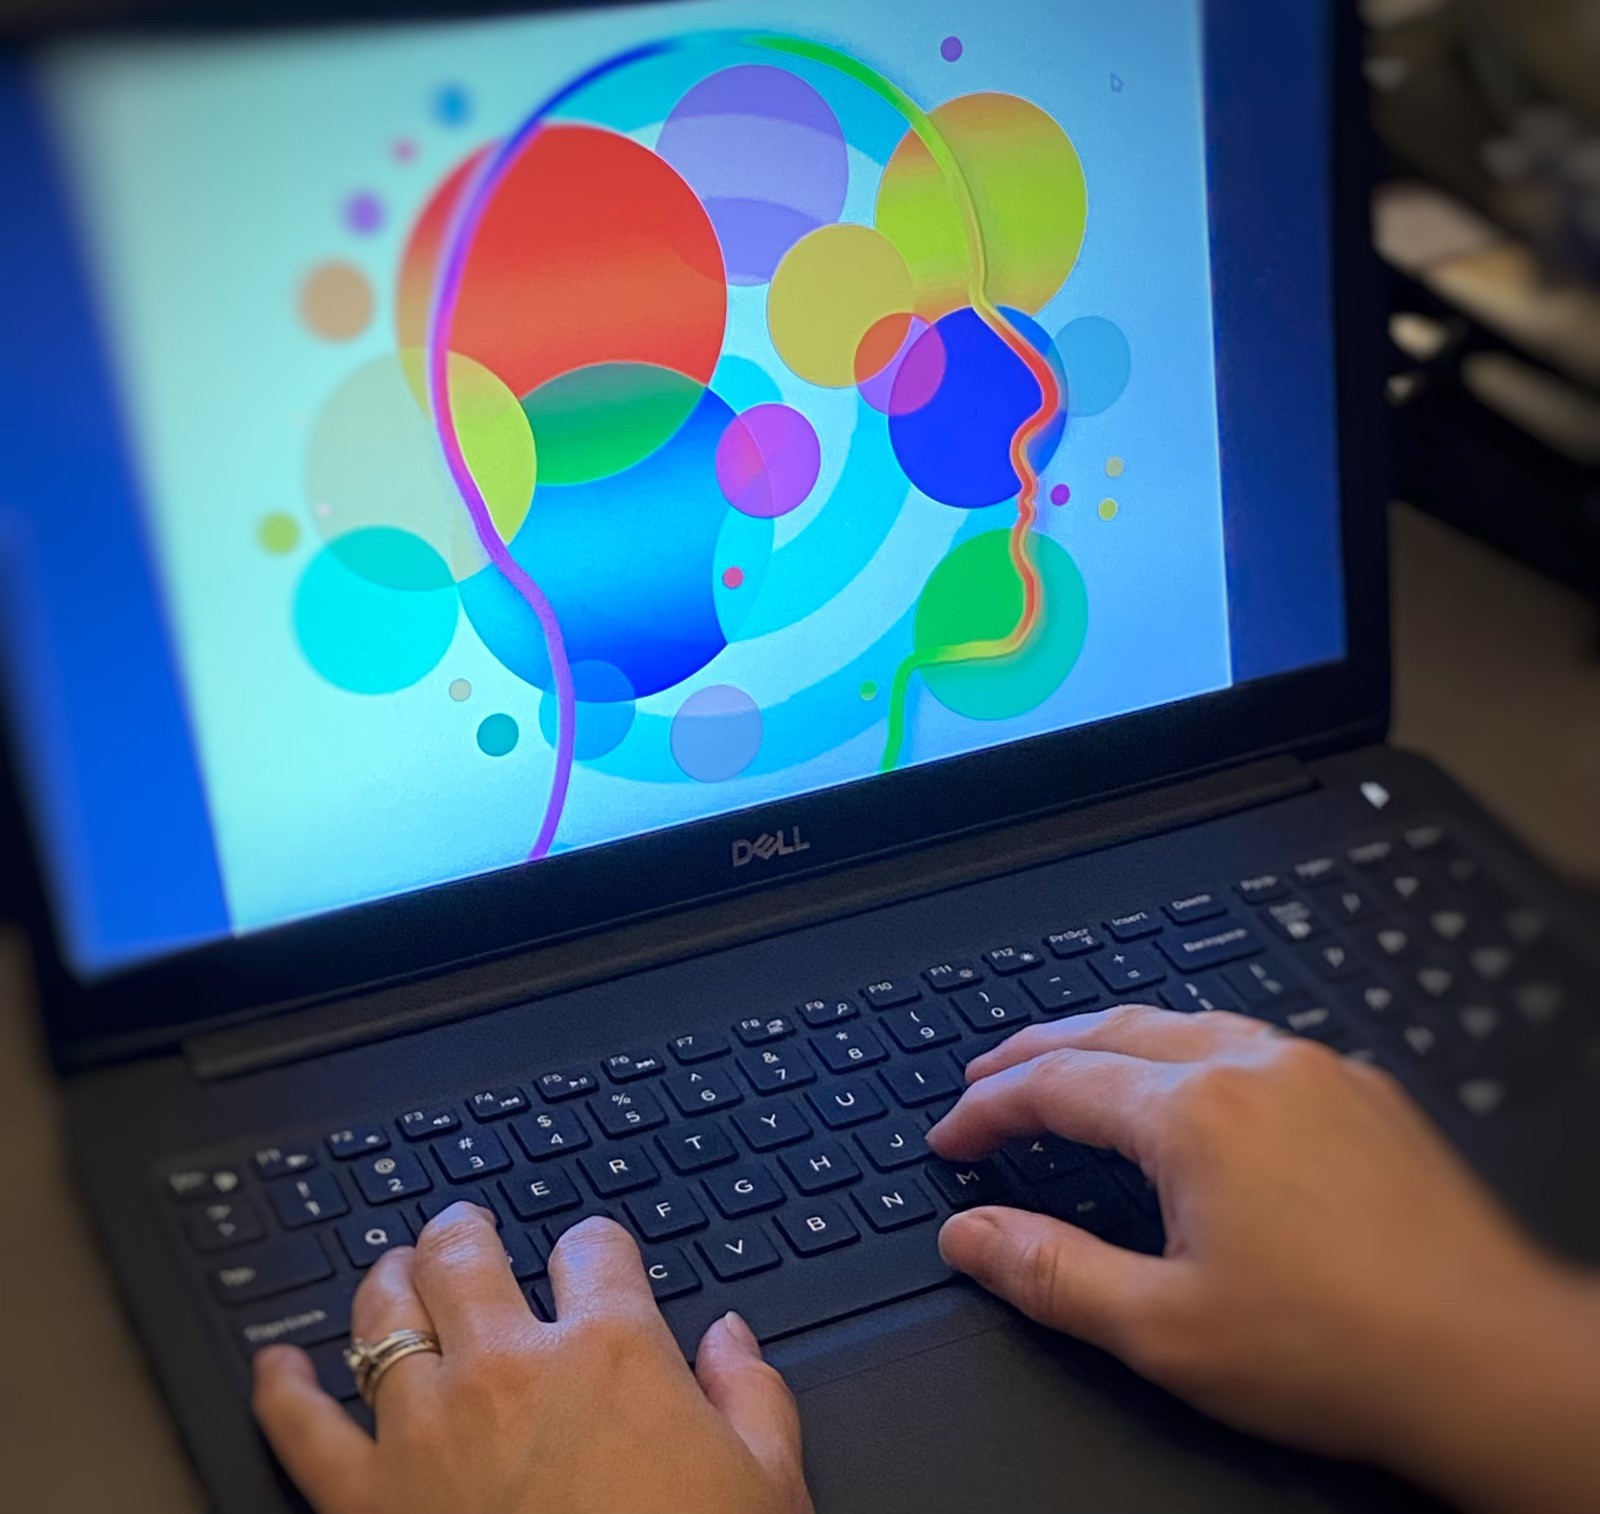 Laptop computer with colourful balls on screen and two hands resting on the keyboard